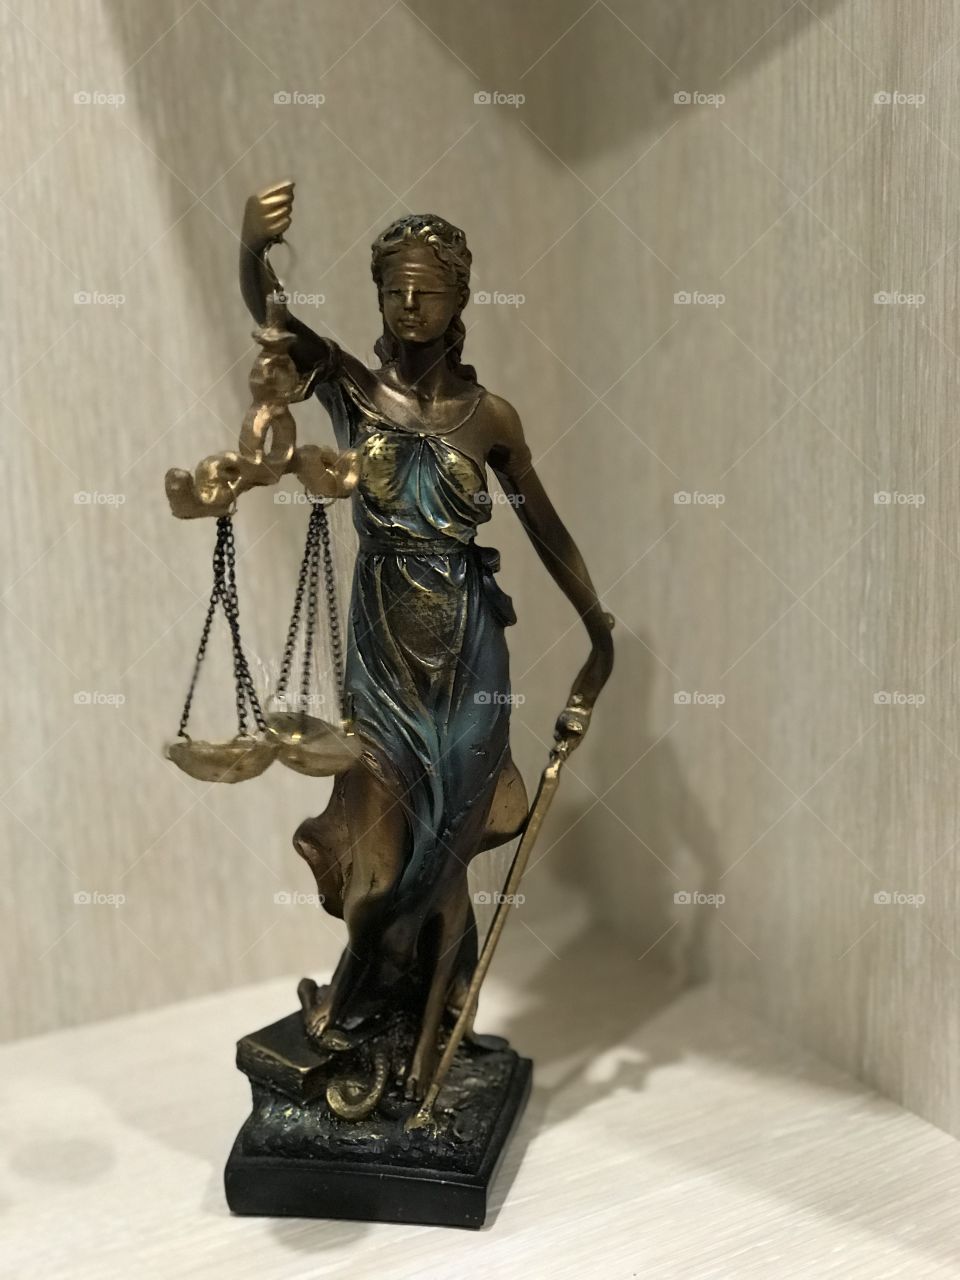 Themis - justice, law; Themis scales - a symbol of justice; Themis' servants - servants of the law, judges